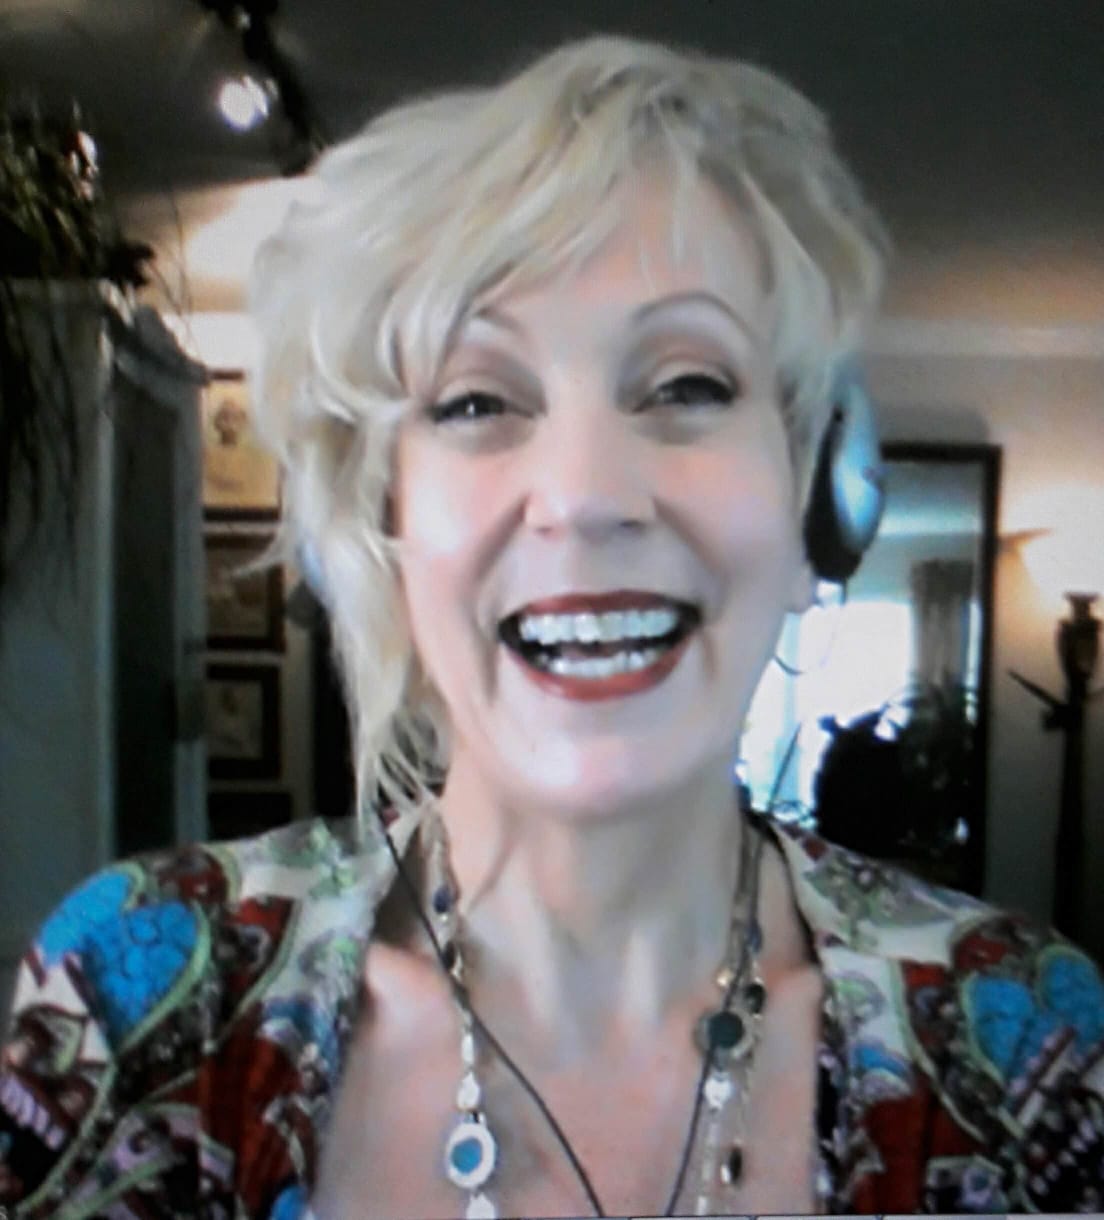 A woman wearing headphones and a necklace smiles for the camera, Jacqueline gates, life coach,  life coach training, the coaching guild